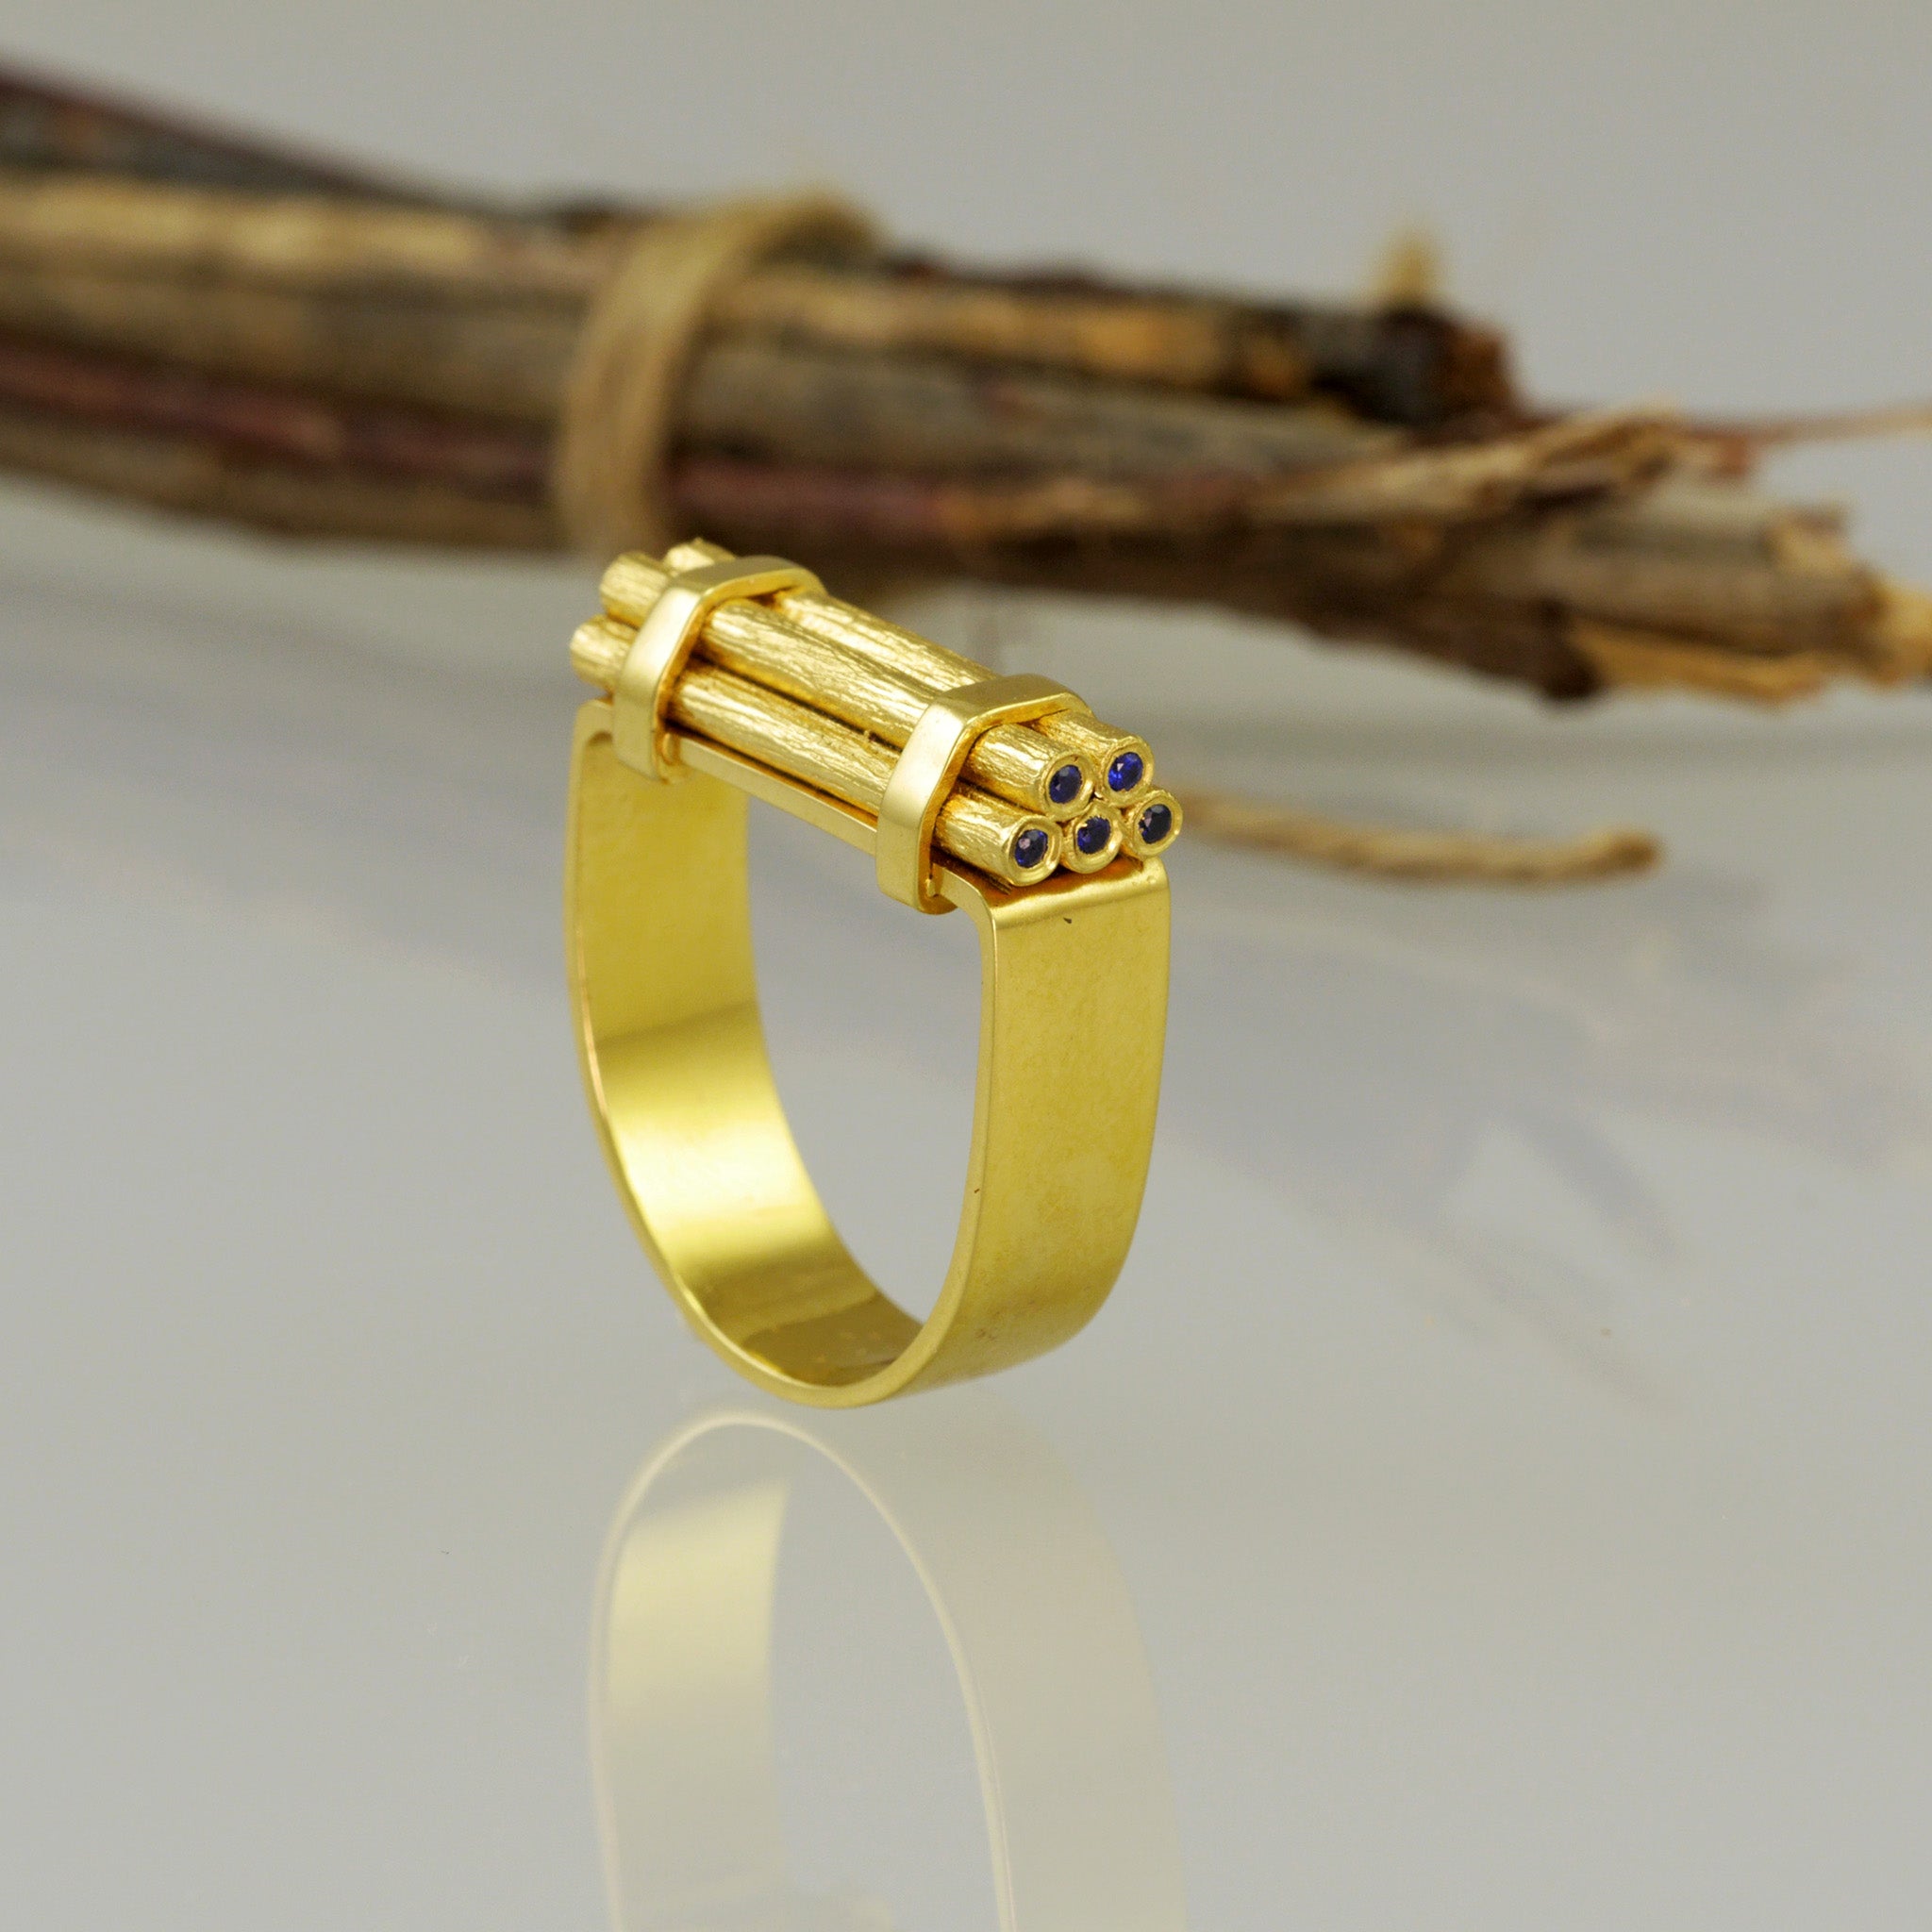 A unique, handmade gold ring that draws its inspiration from stacks of wood piled together. Tiny sparkling Sapphires were added to get that extra color and glow. Stacked wood lies in the background